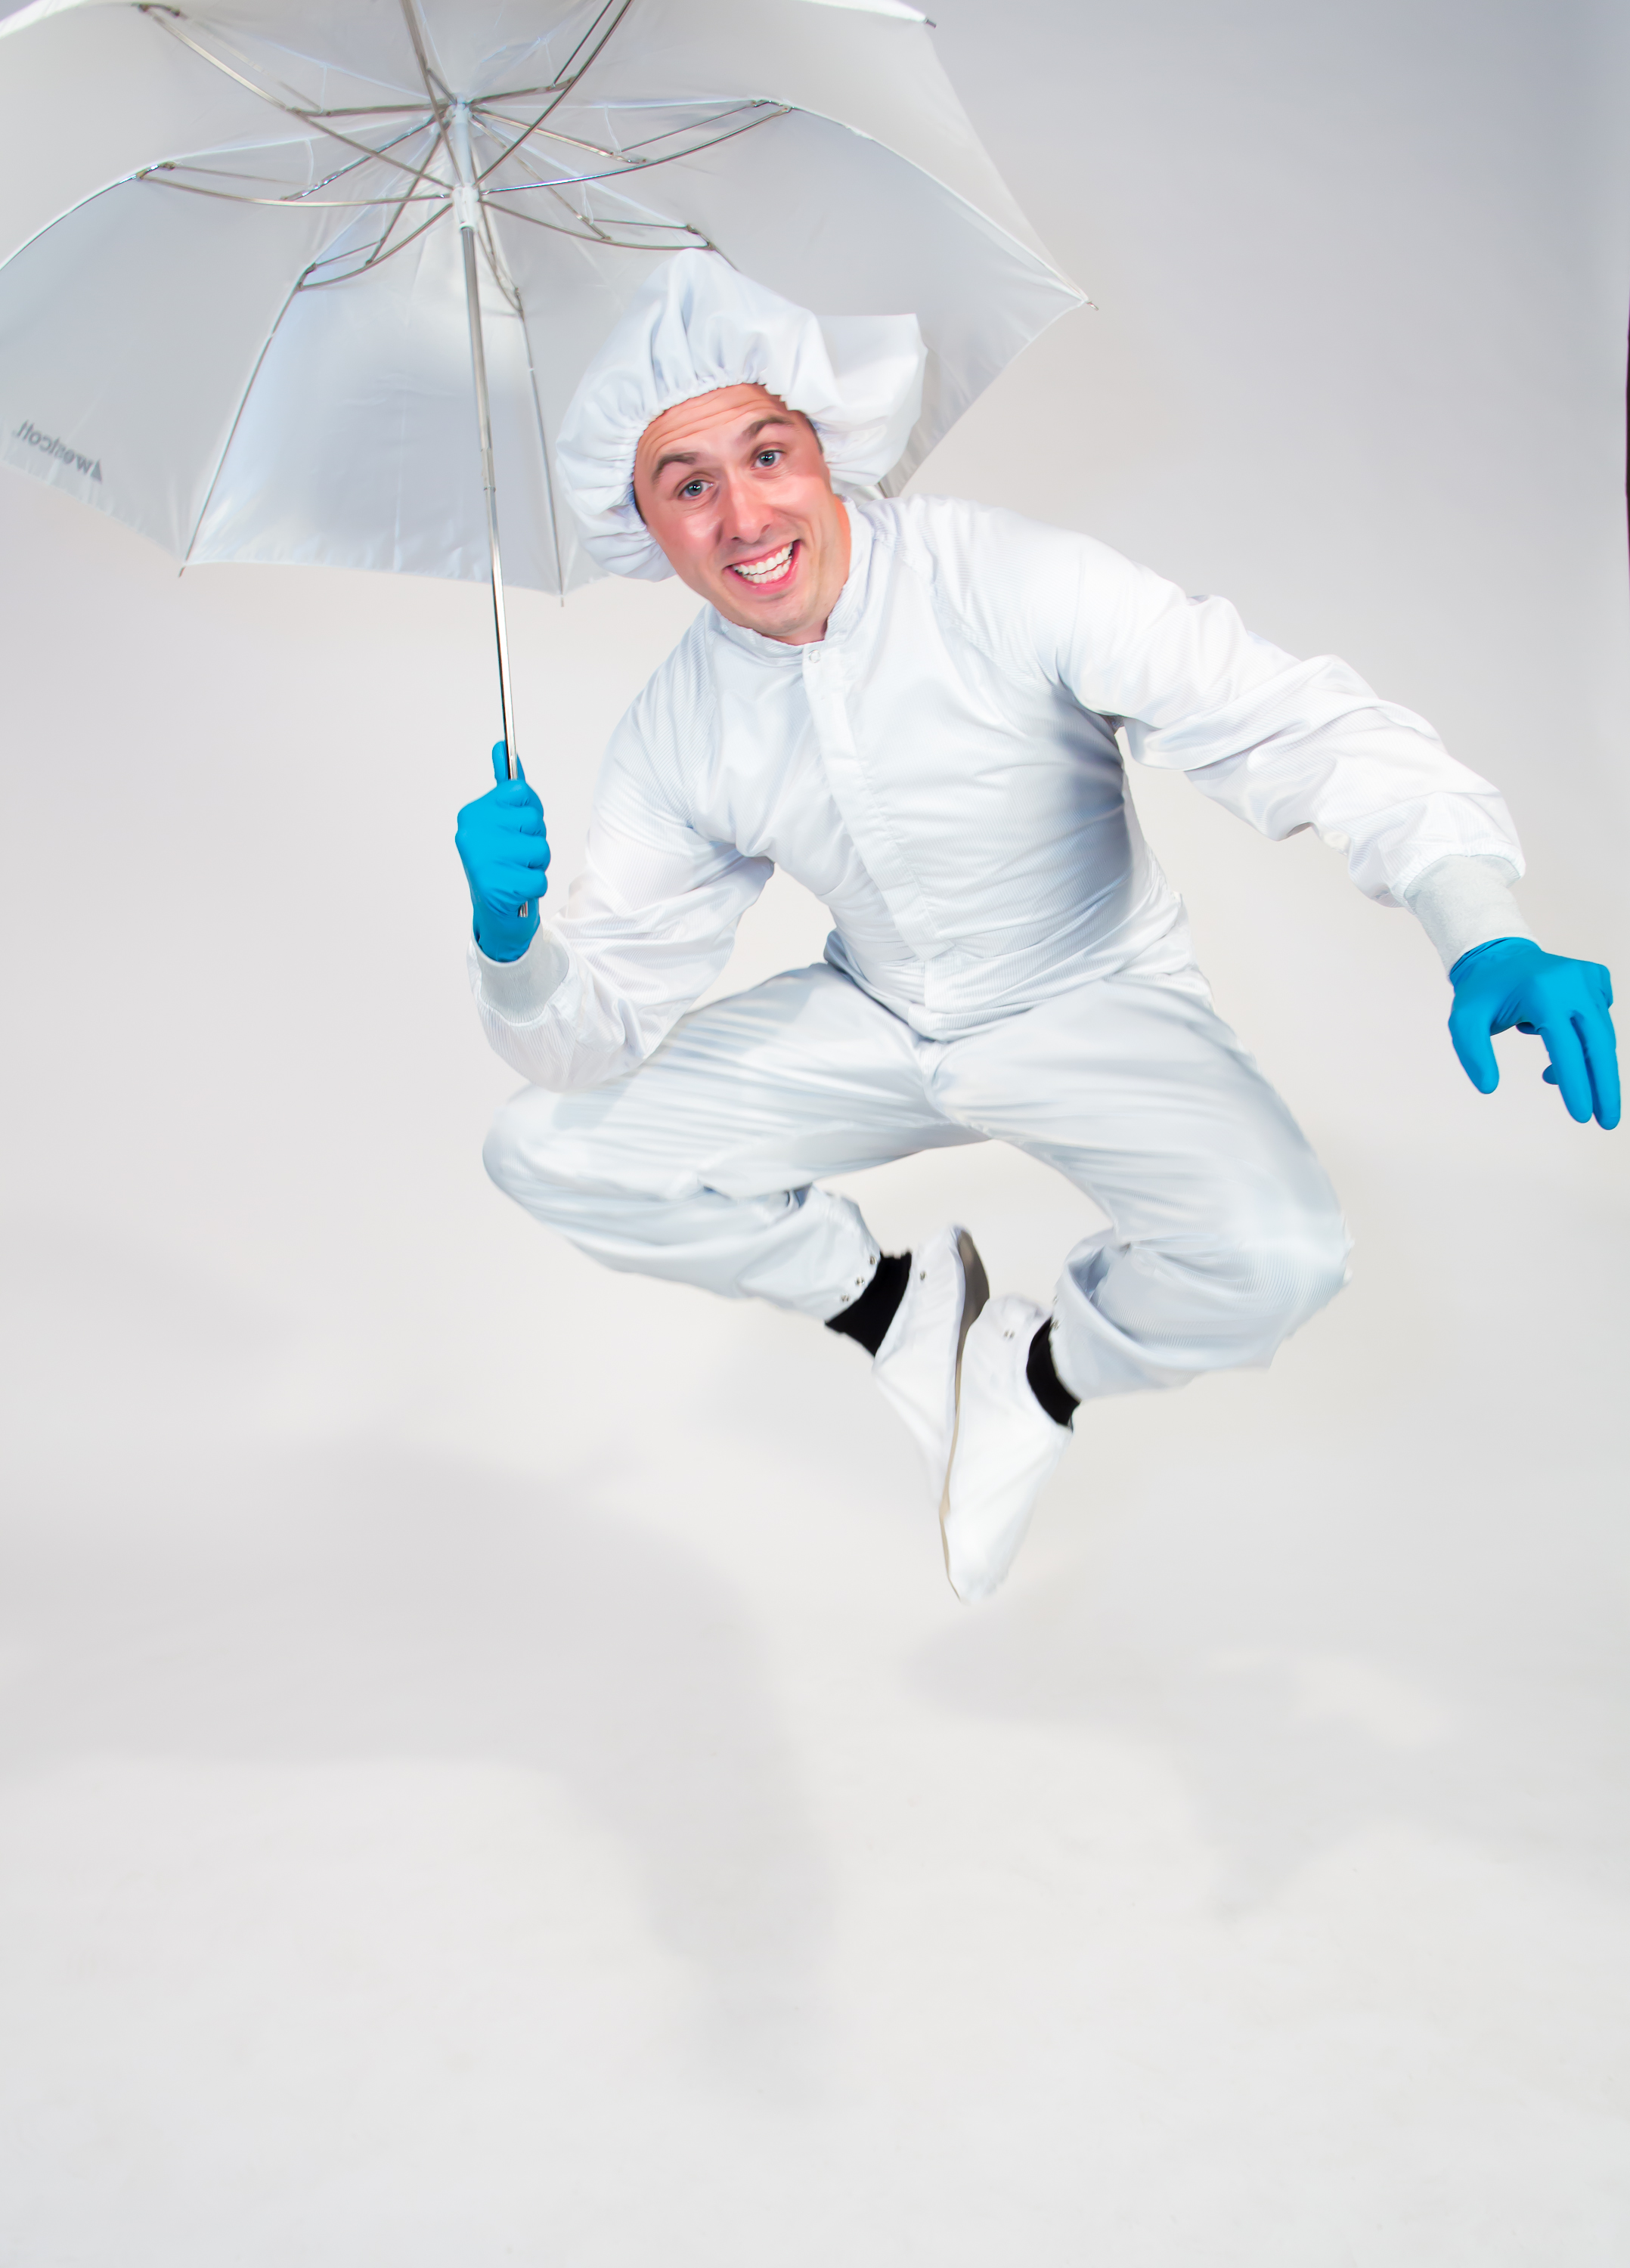 Jumping in a Cleanroom Suit